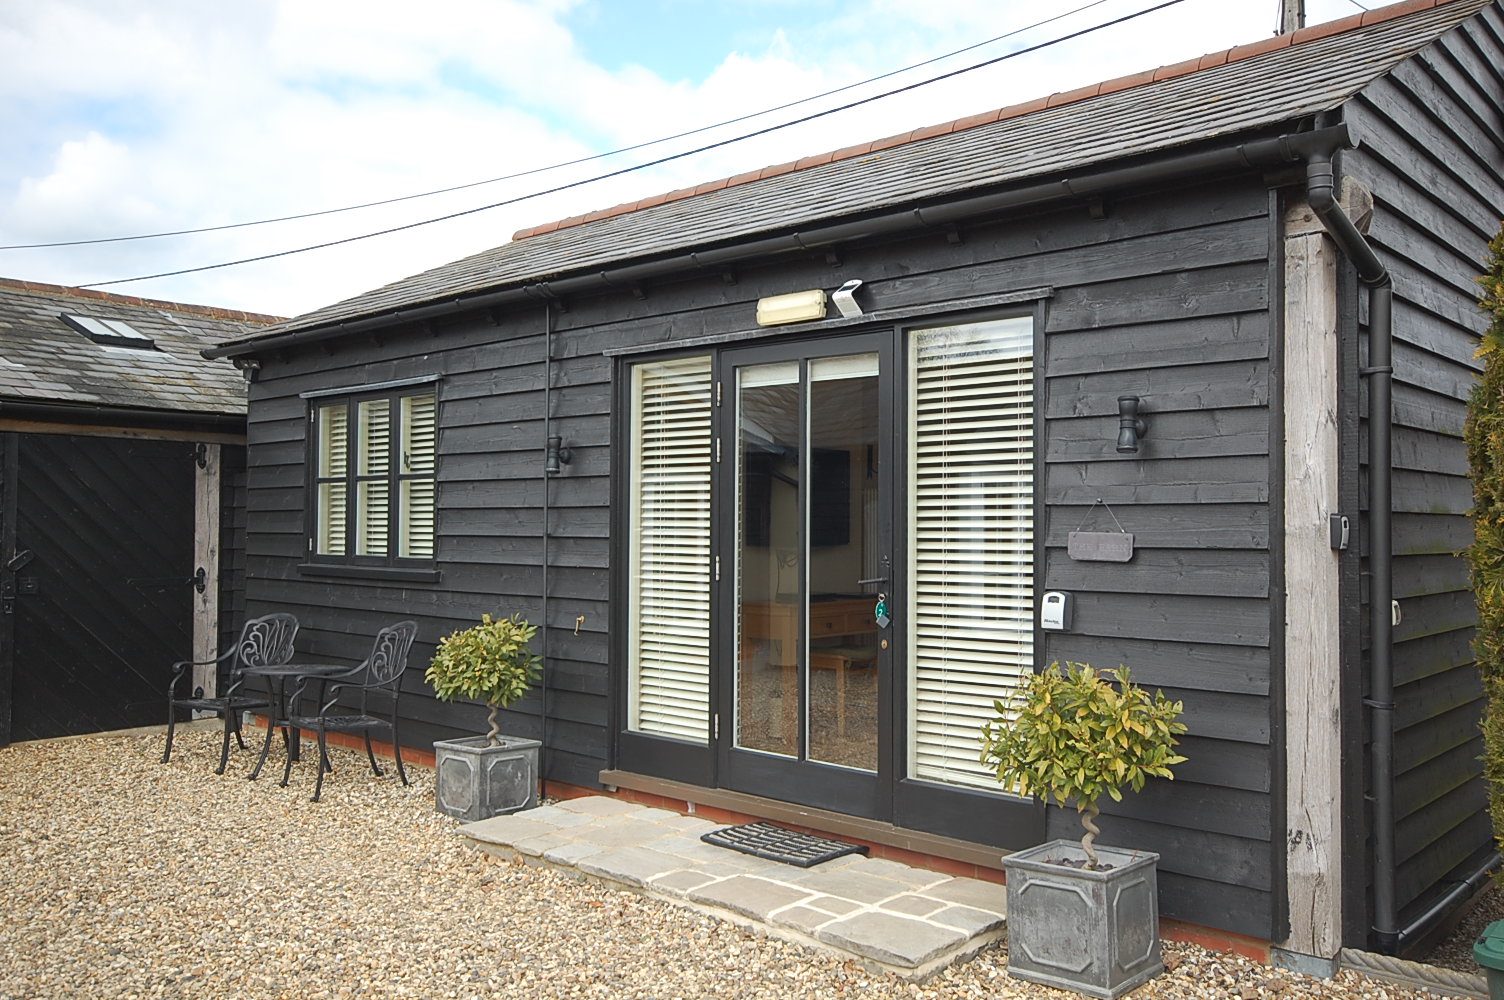 The Barn - Self Catering on the Essex Suffolk border